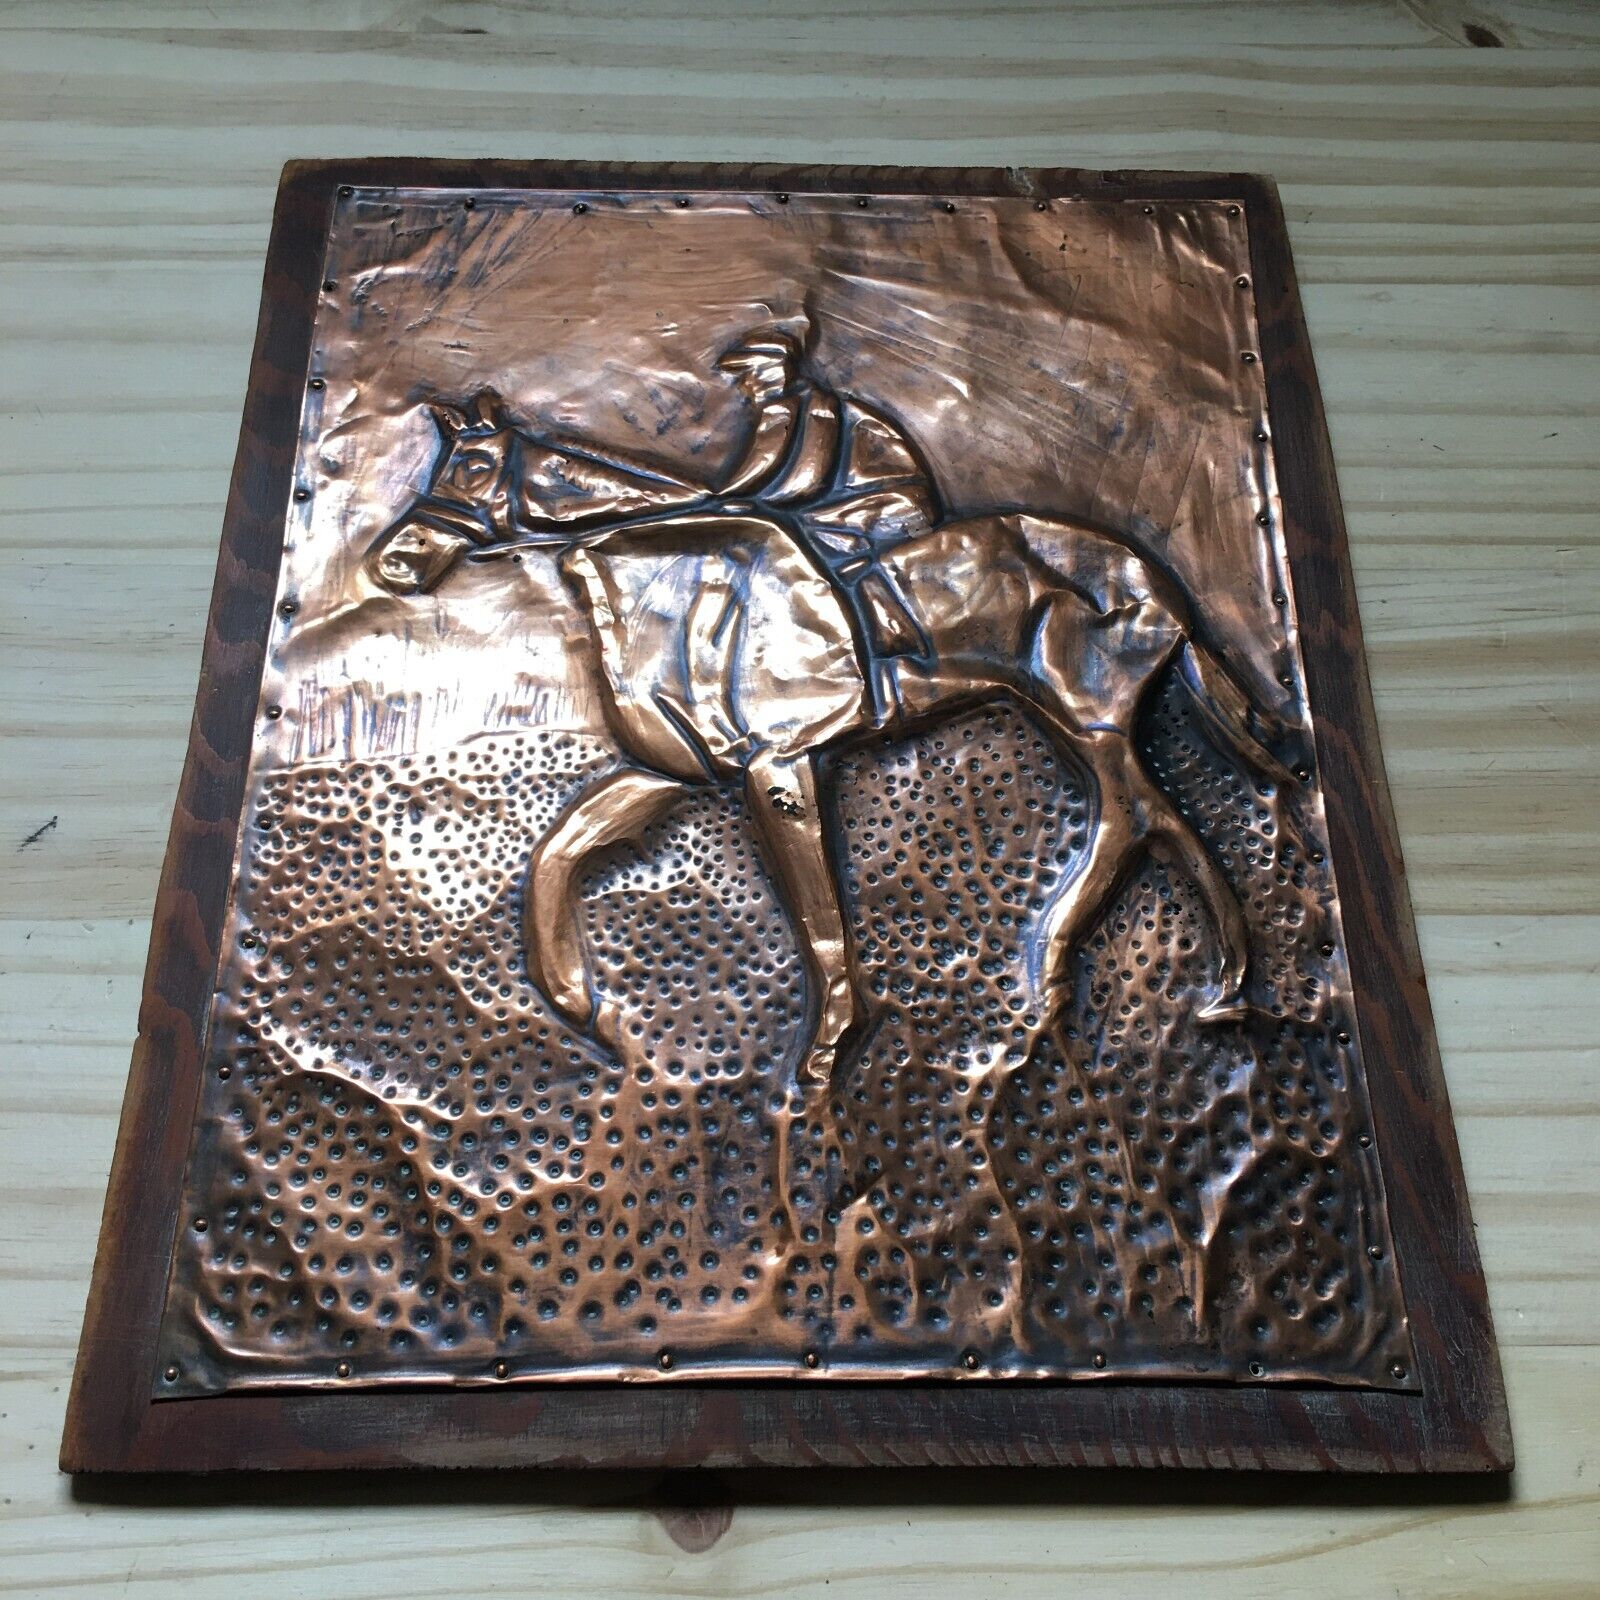 Vintage HANDCRAFTED HAMMERED COPPER The Man On The Horse Wooden Board 12